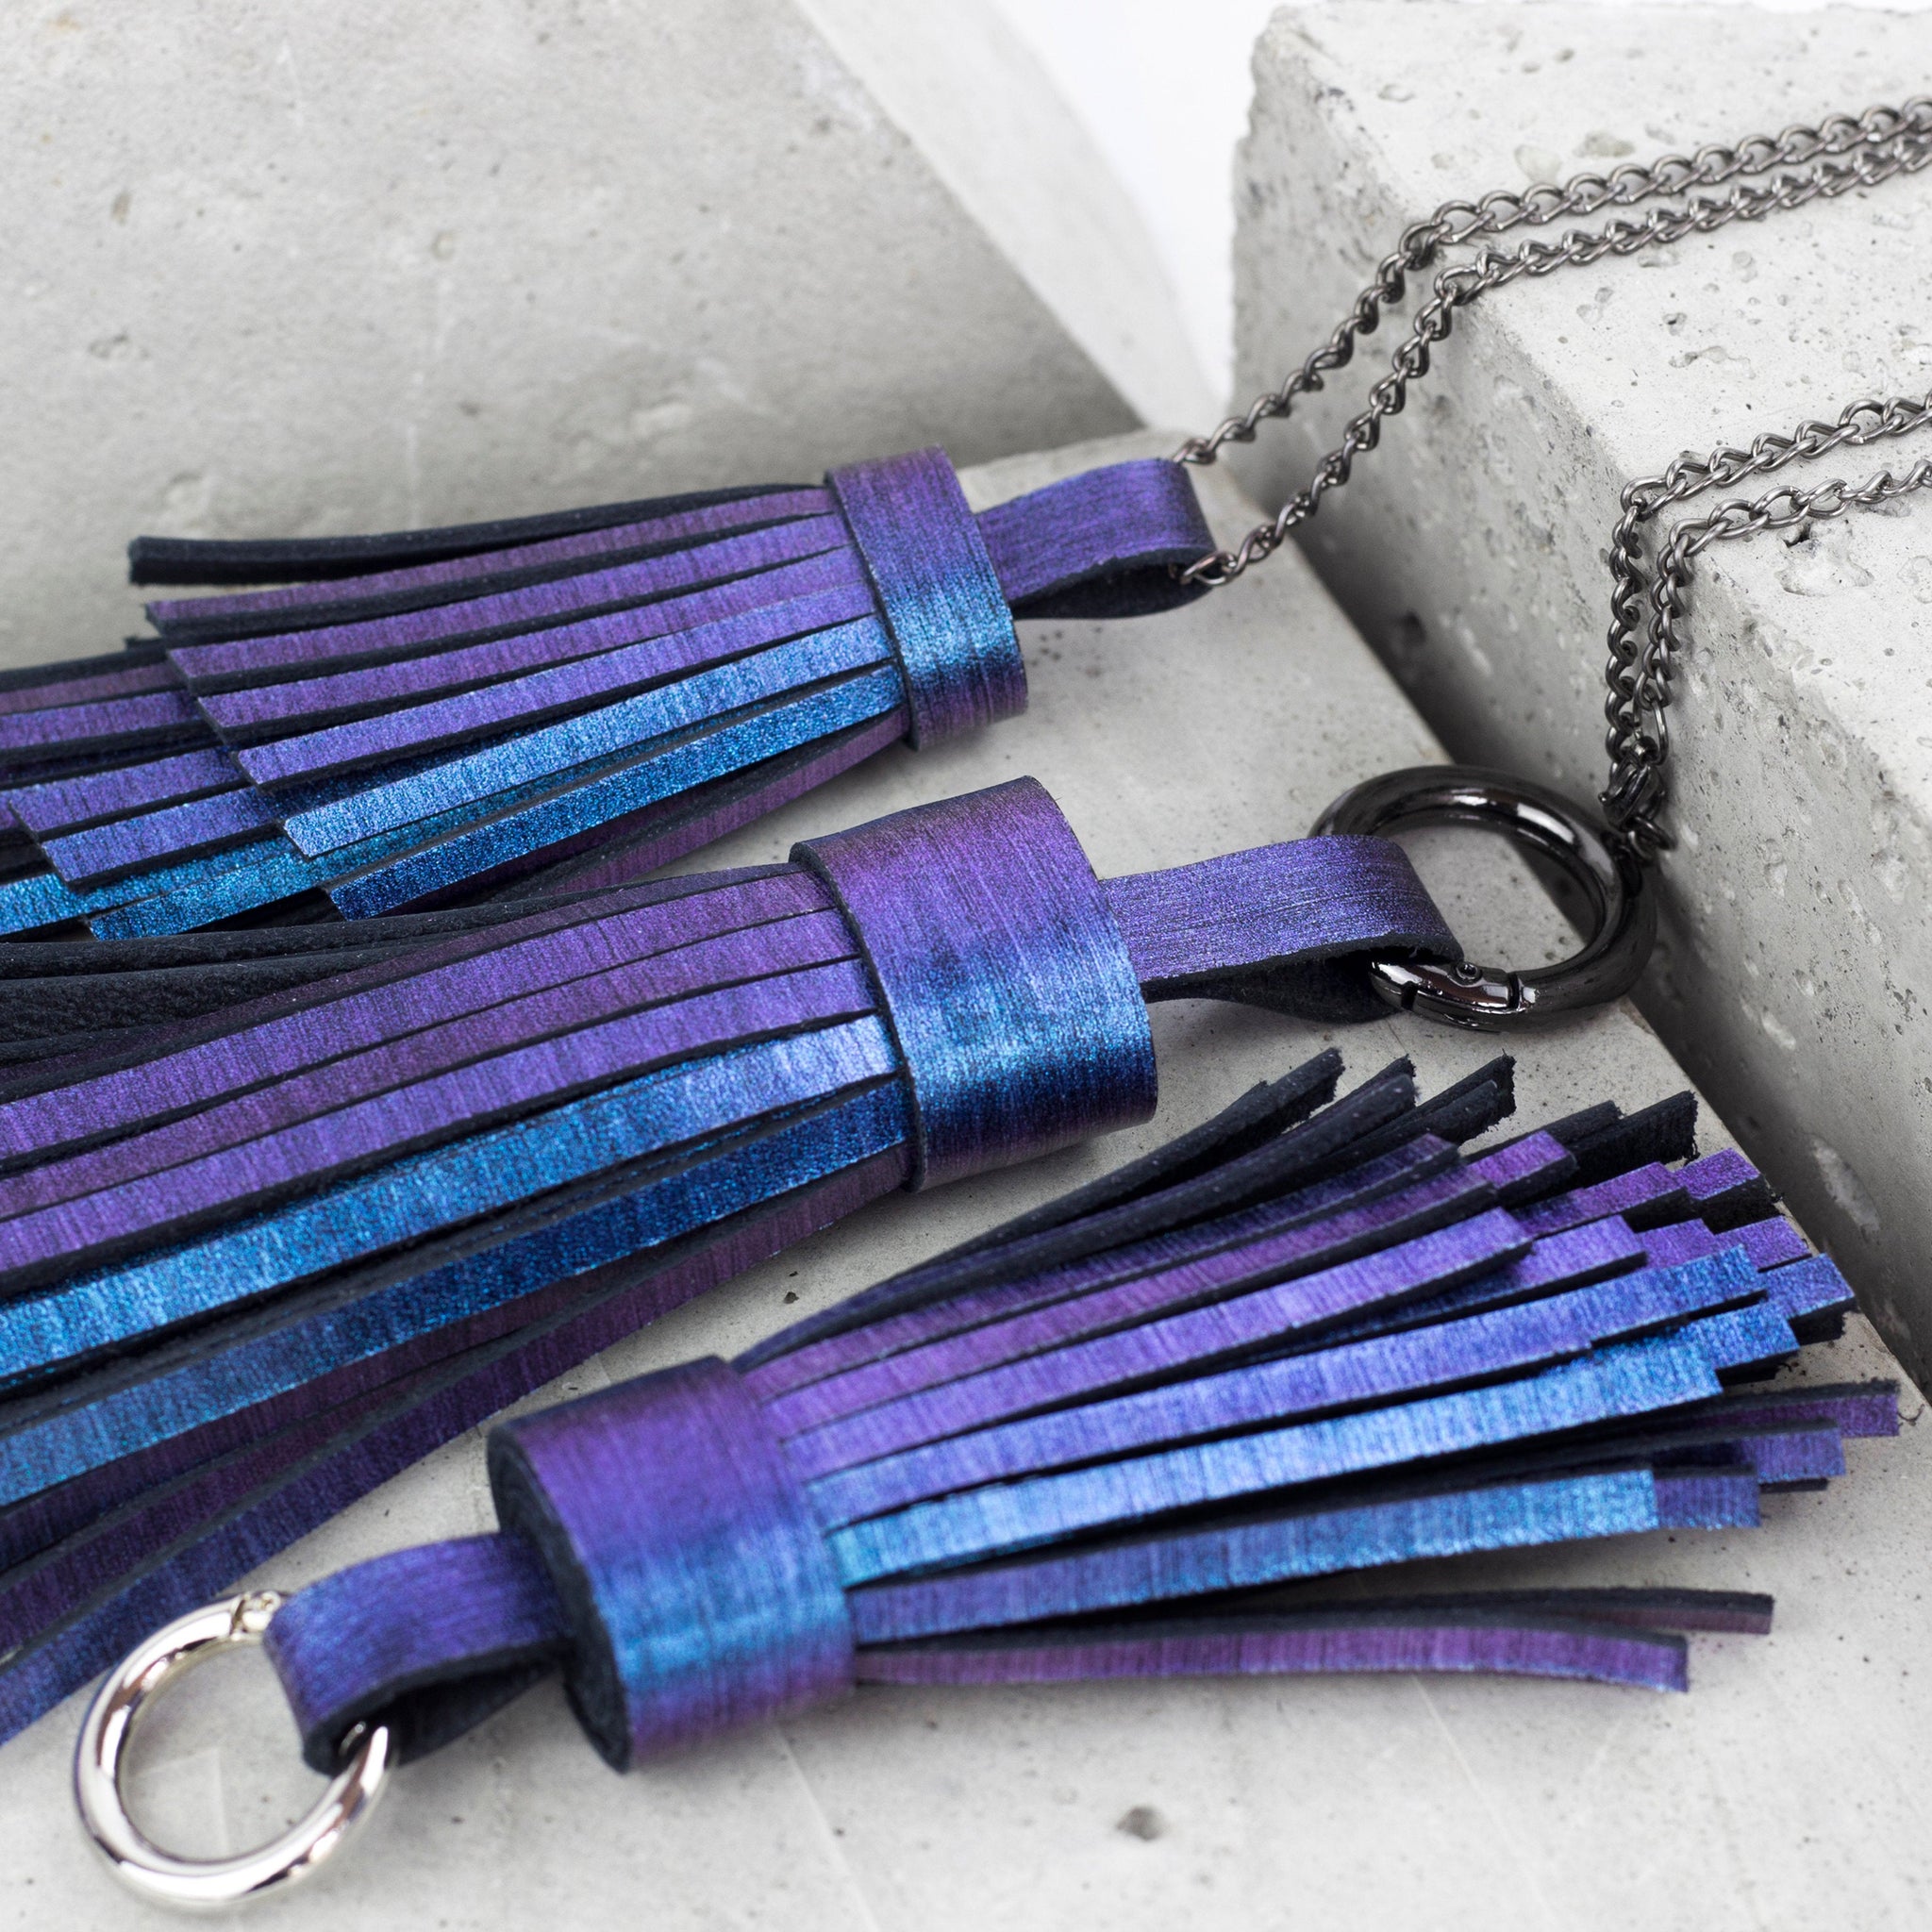 Leather Tassel Necklace Holographic-bag_charm, Designer jewelry, gift_for_her, holo, holographic, iridescent, Jewelry, keychain, leaher_neklace, leather jewelry, leather necklace, leather tassel, leather_tassel, minimalist, multicolor, Necklace, rainbow, Recycled jewelry, tassel, tassel_necklace-Mimikri